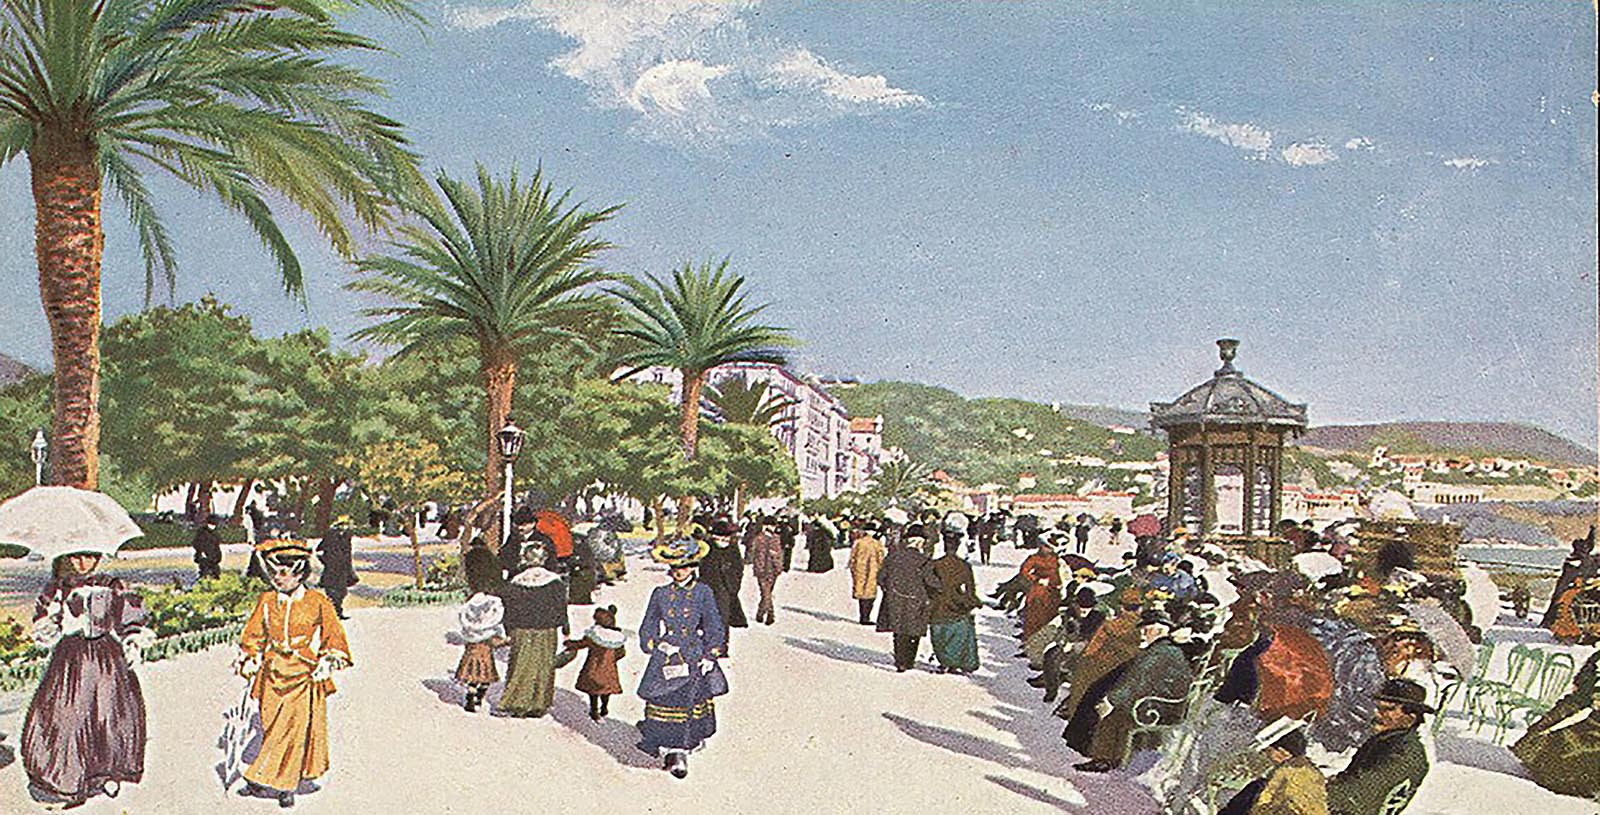 Discover the French Riviera (or Côte d'Azur)—the town Juan-les-Pins in particular—touted as the place to promenade from the Belle Époque period onward.